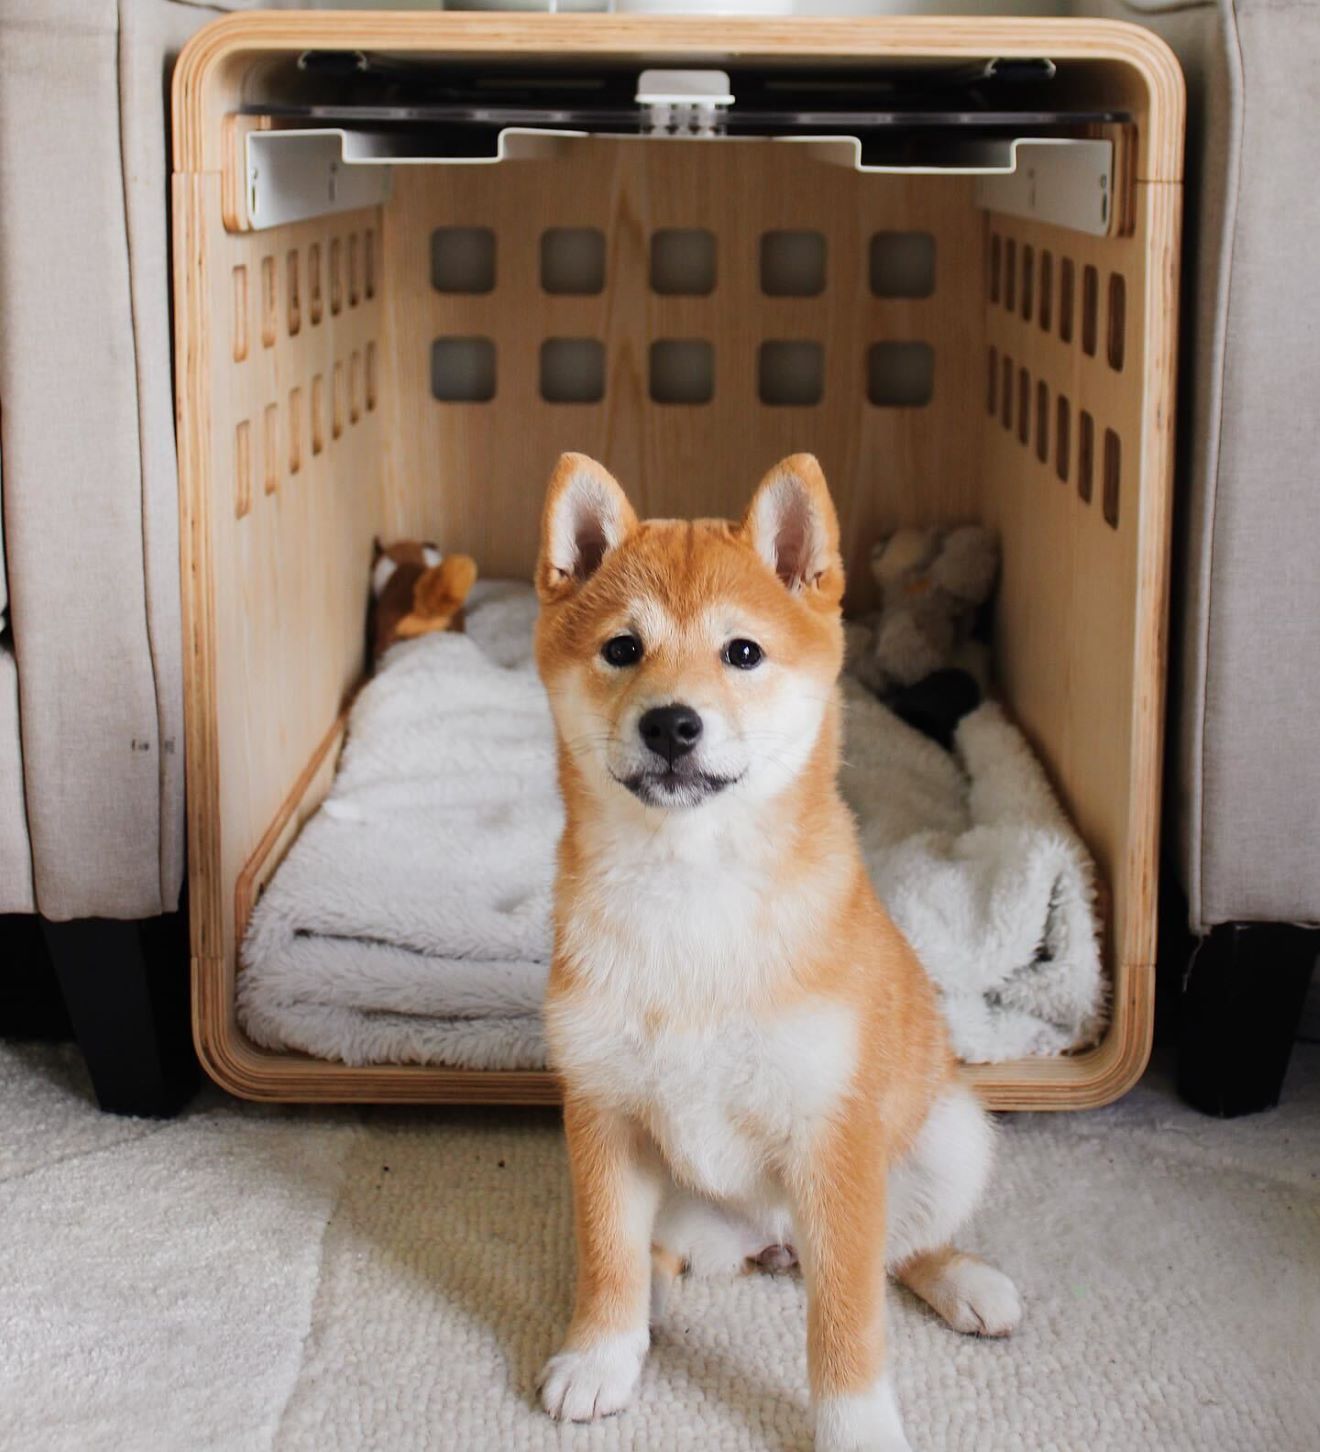 Fable Crate Makes the Best Looking Dog Crate on the Market - InsideHook